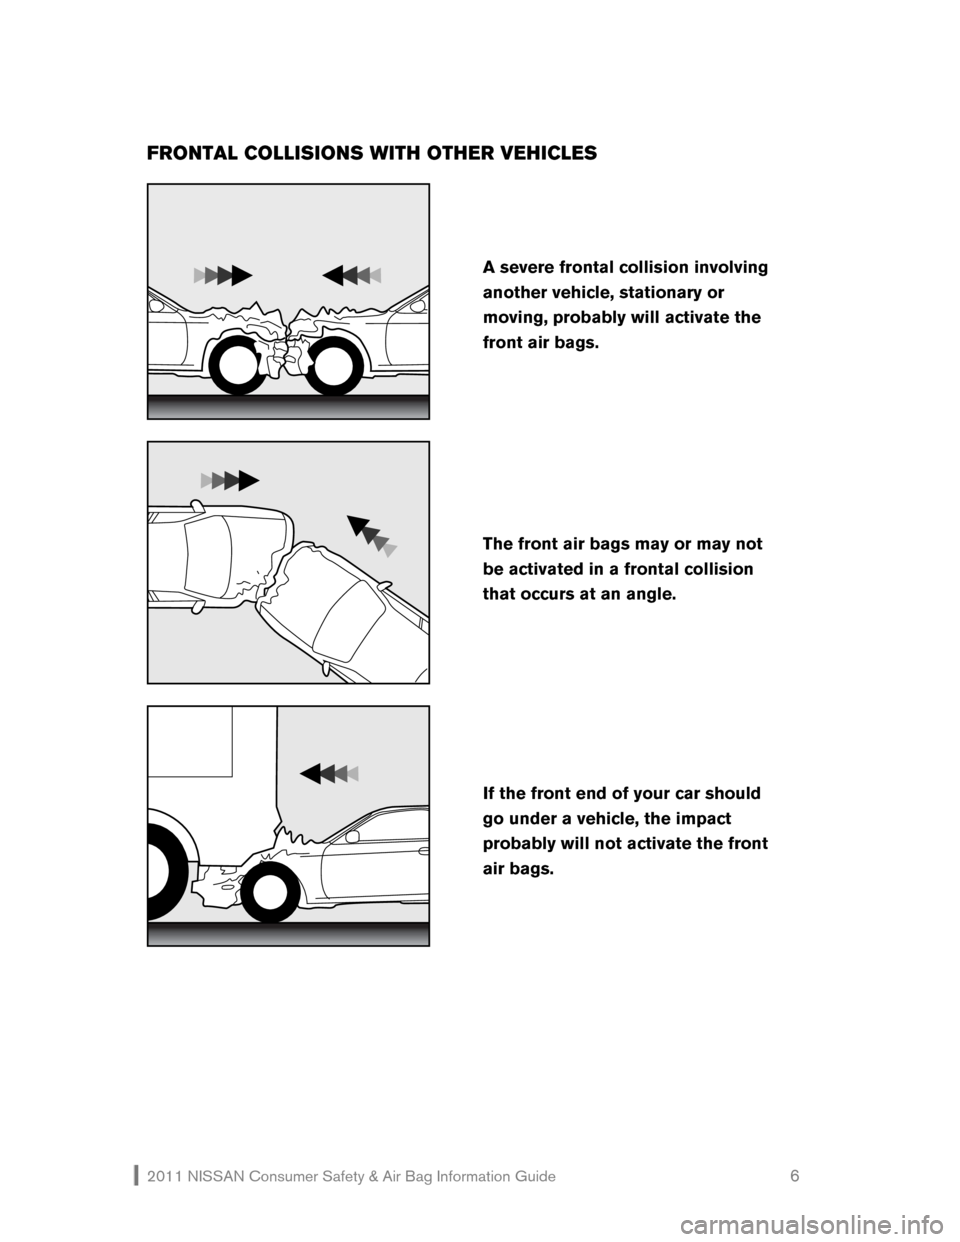 NISSAN JUKE 2011 F15 / 1.G Consumer Safety Air Bag Information Guide 2011 NISSAN Consumer Safety & Air Bag Information Guide                                                       6 
FRONTAL COLLISIONS WITH OTHER VEHICLES 
 
 
 
 
If the front end of your car should 
go